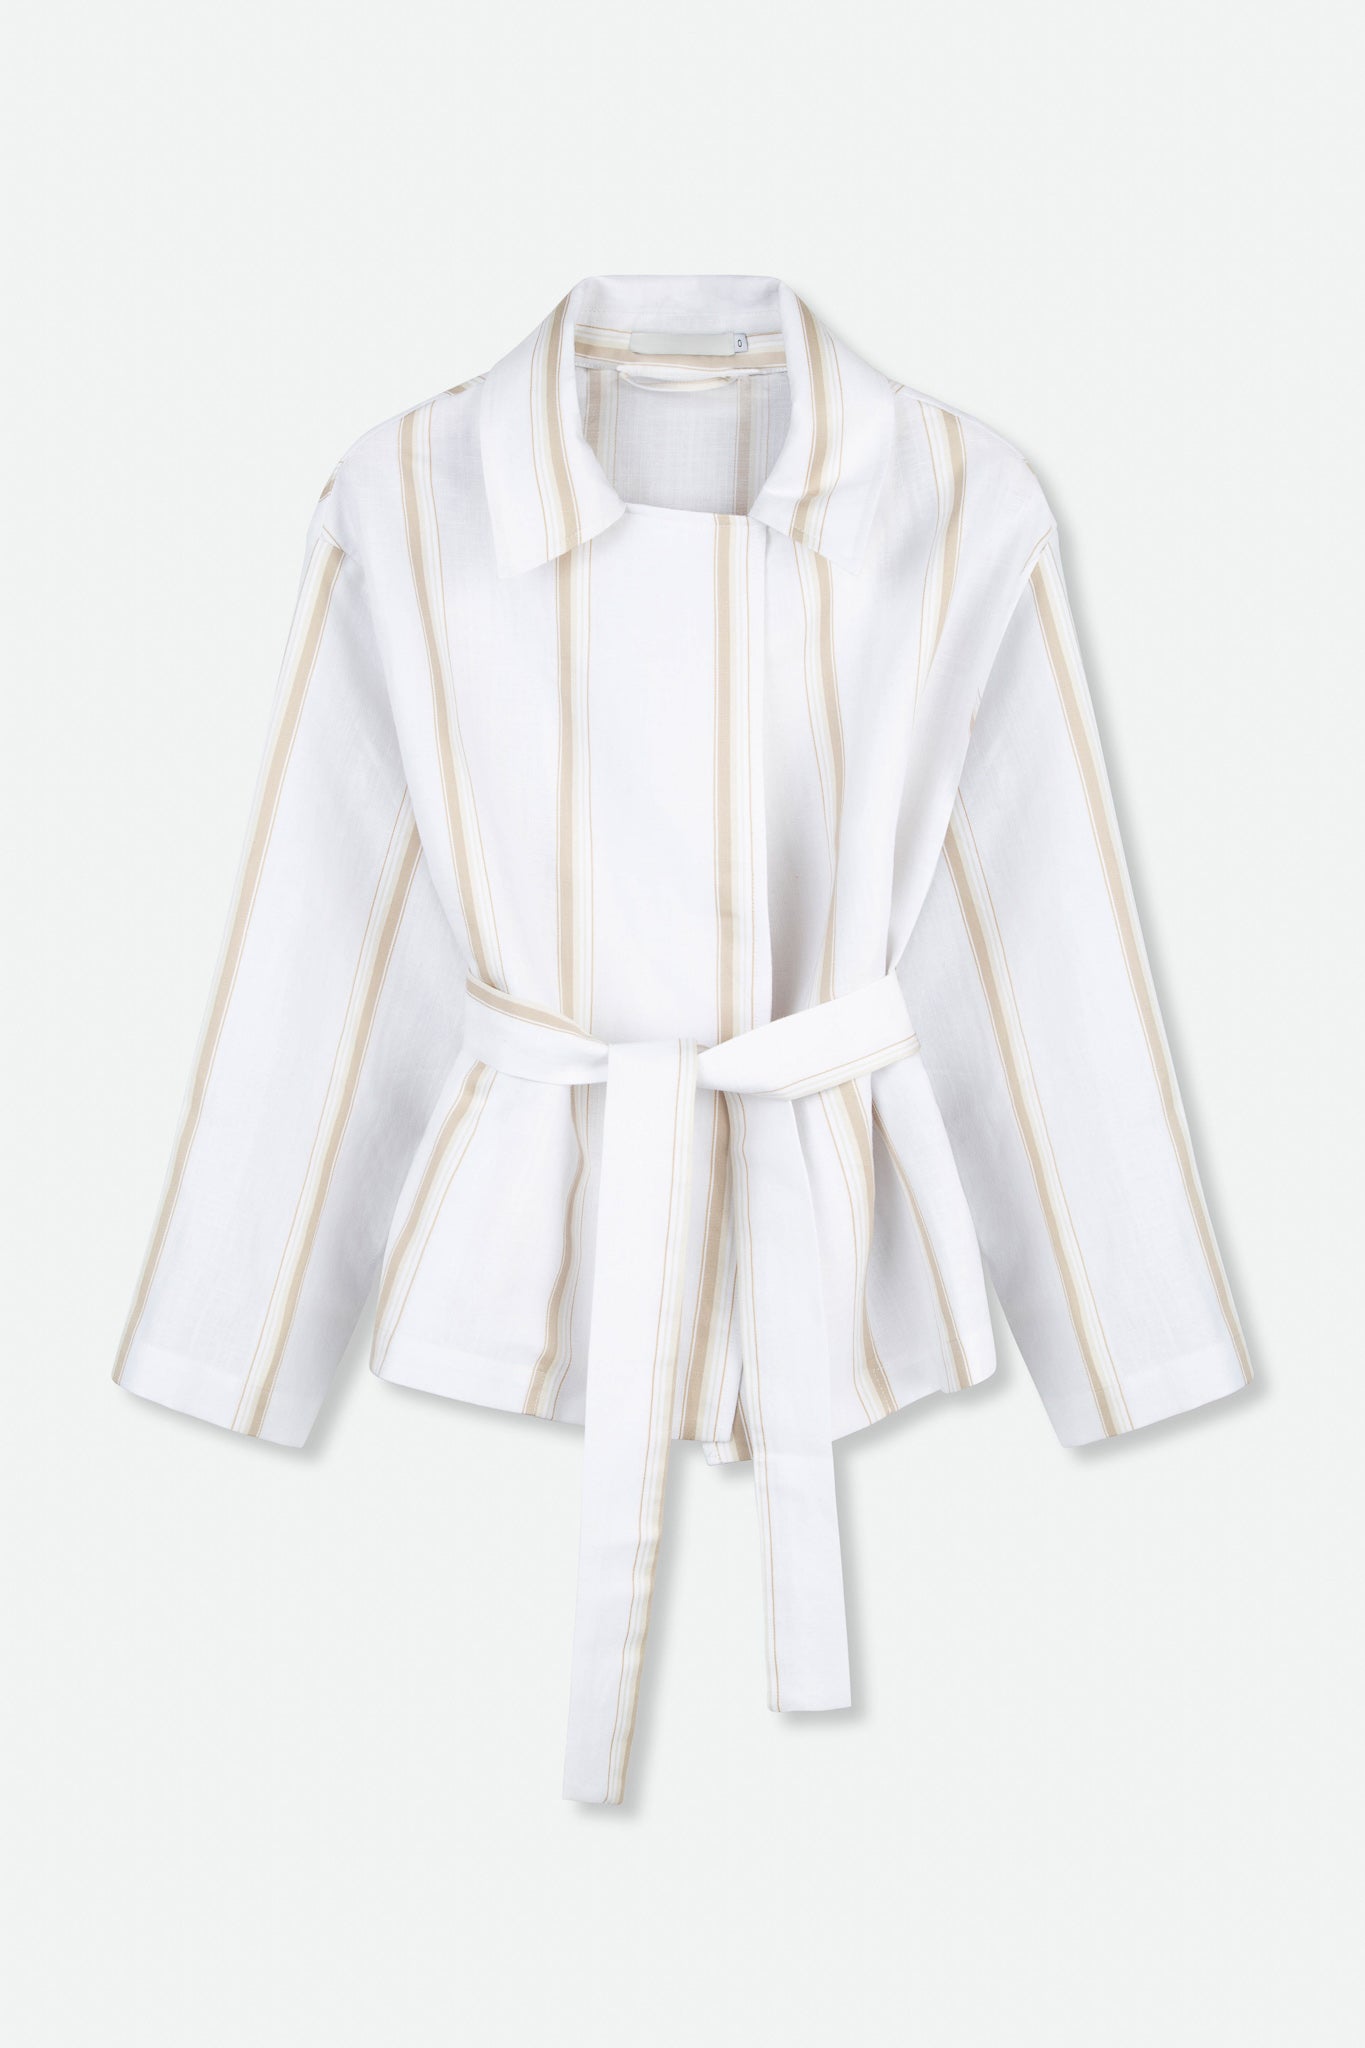 KIMBERLY TIED JACKET IN LINEN-COTTON - Jarbo